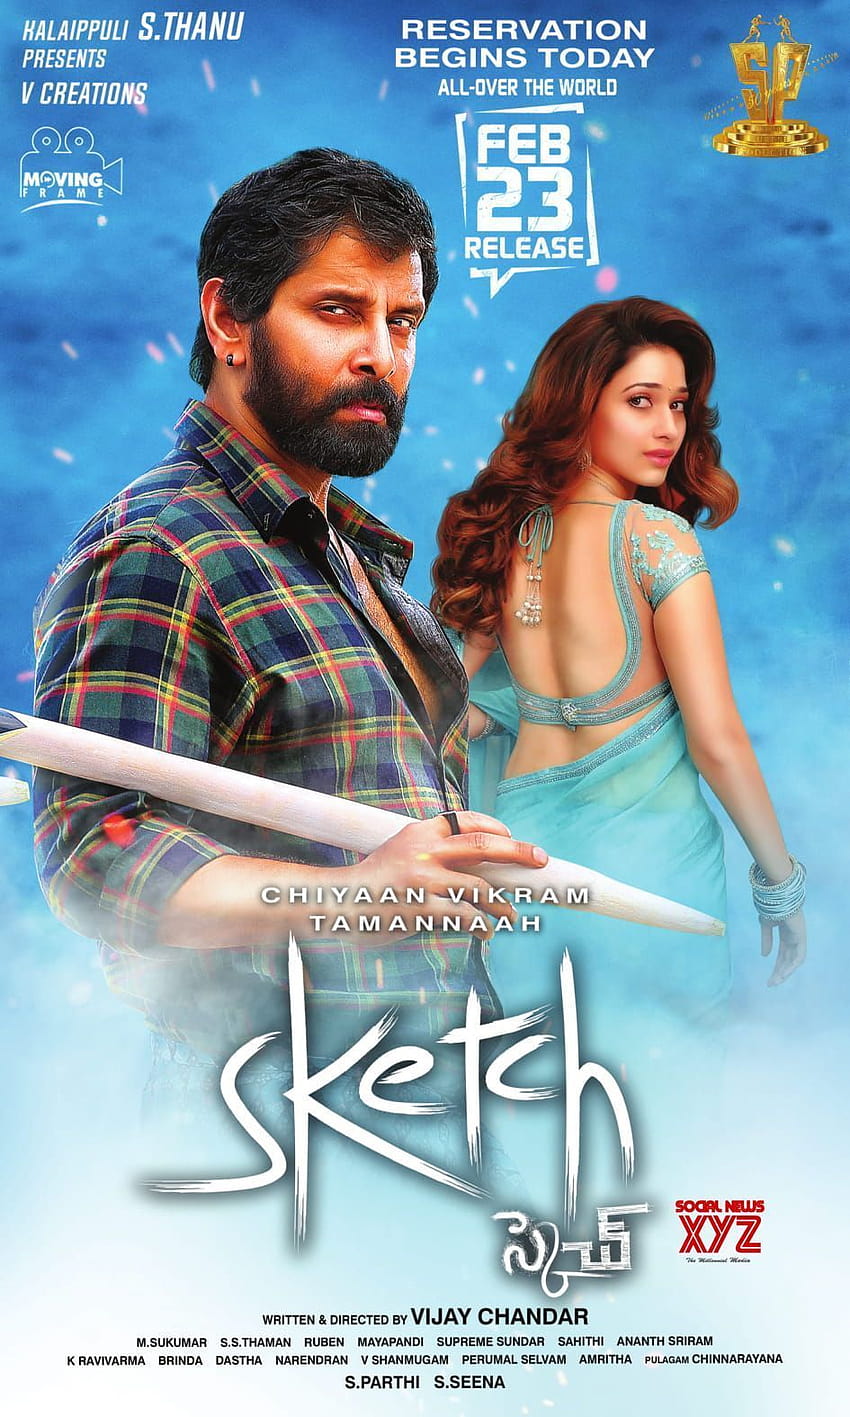 Sketch 2018 Movie Unknwon Facts Budget Boxoffice Collect  VerdictVikramTamannahHollywoodFace  YouTube